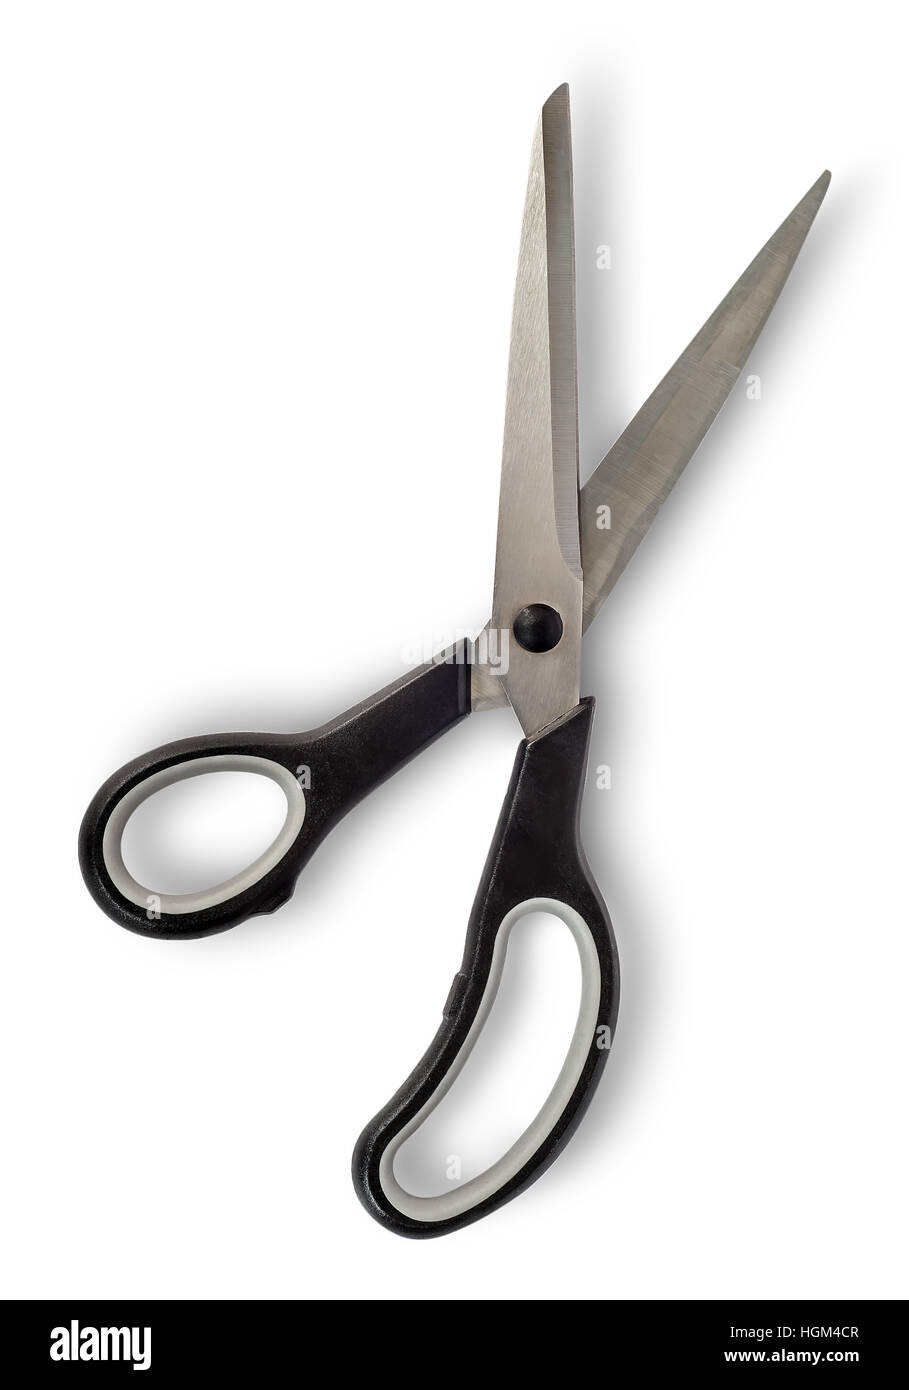 https://c8.alamy.com/comp/HGM4CR/disclosed-big-scissors-with-black-handles-isolated-on-white-background-HGM4CR.jpg